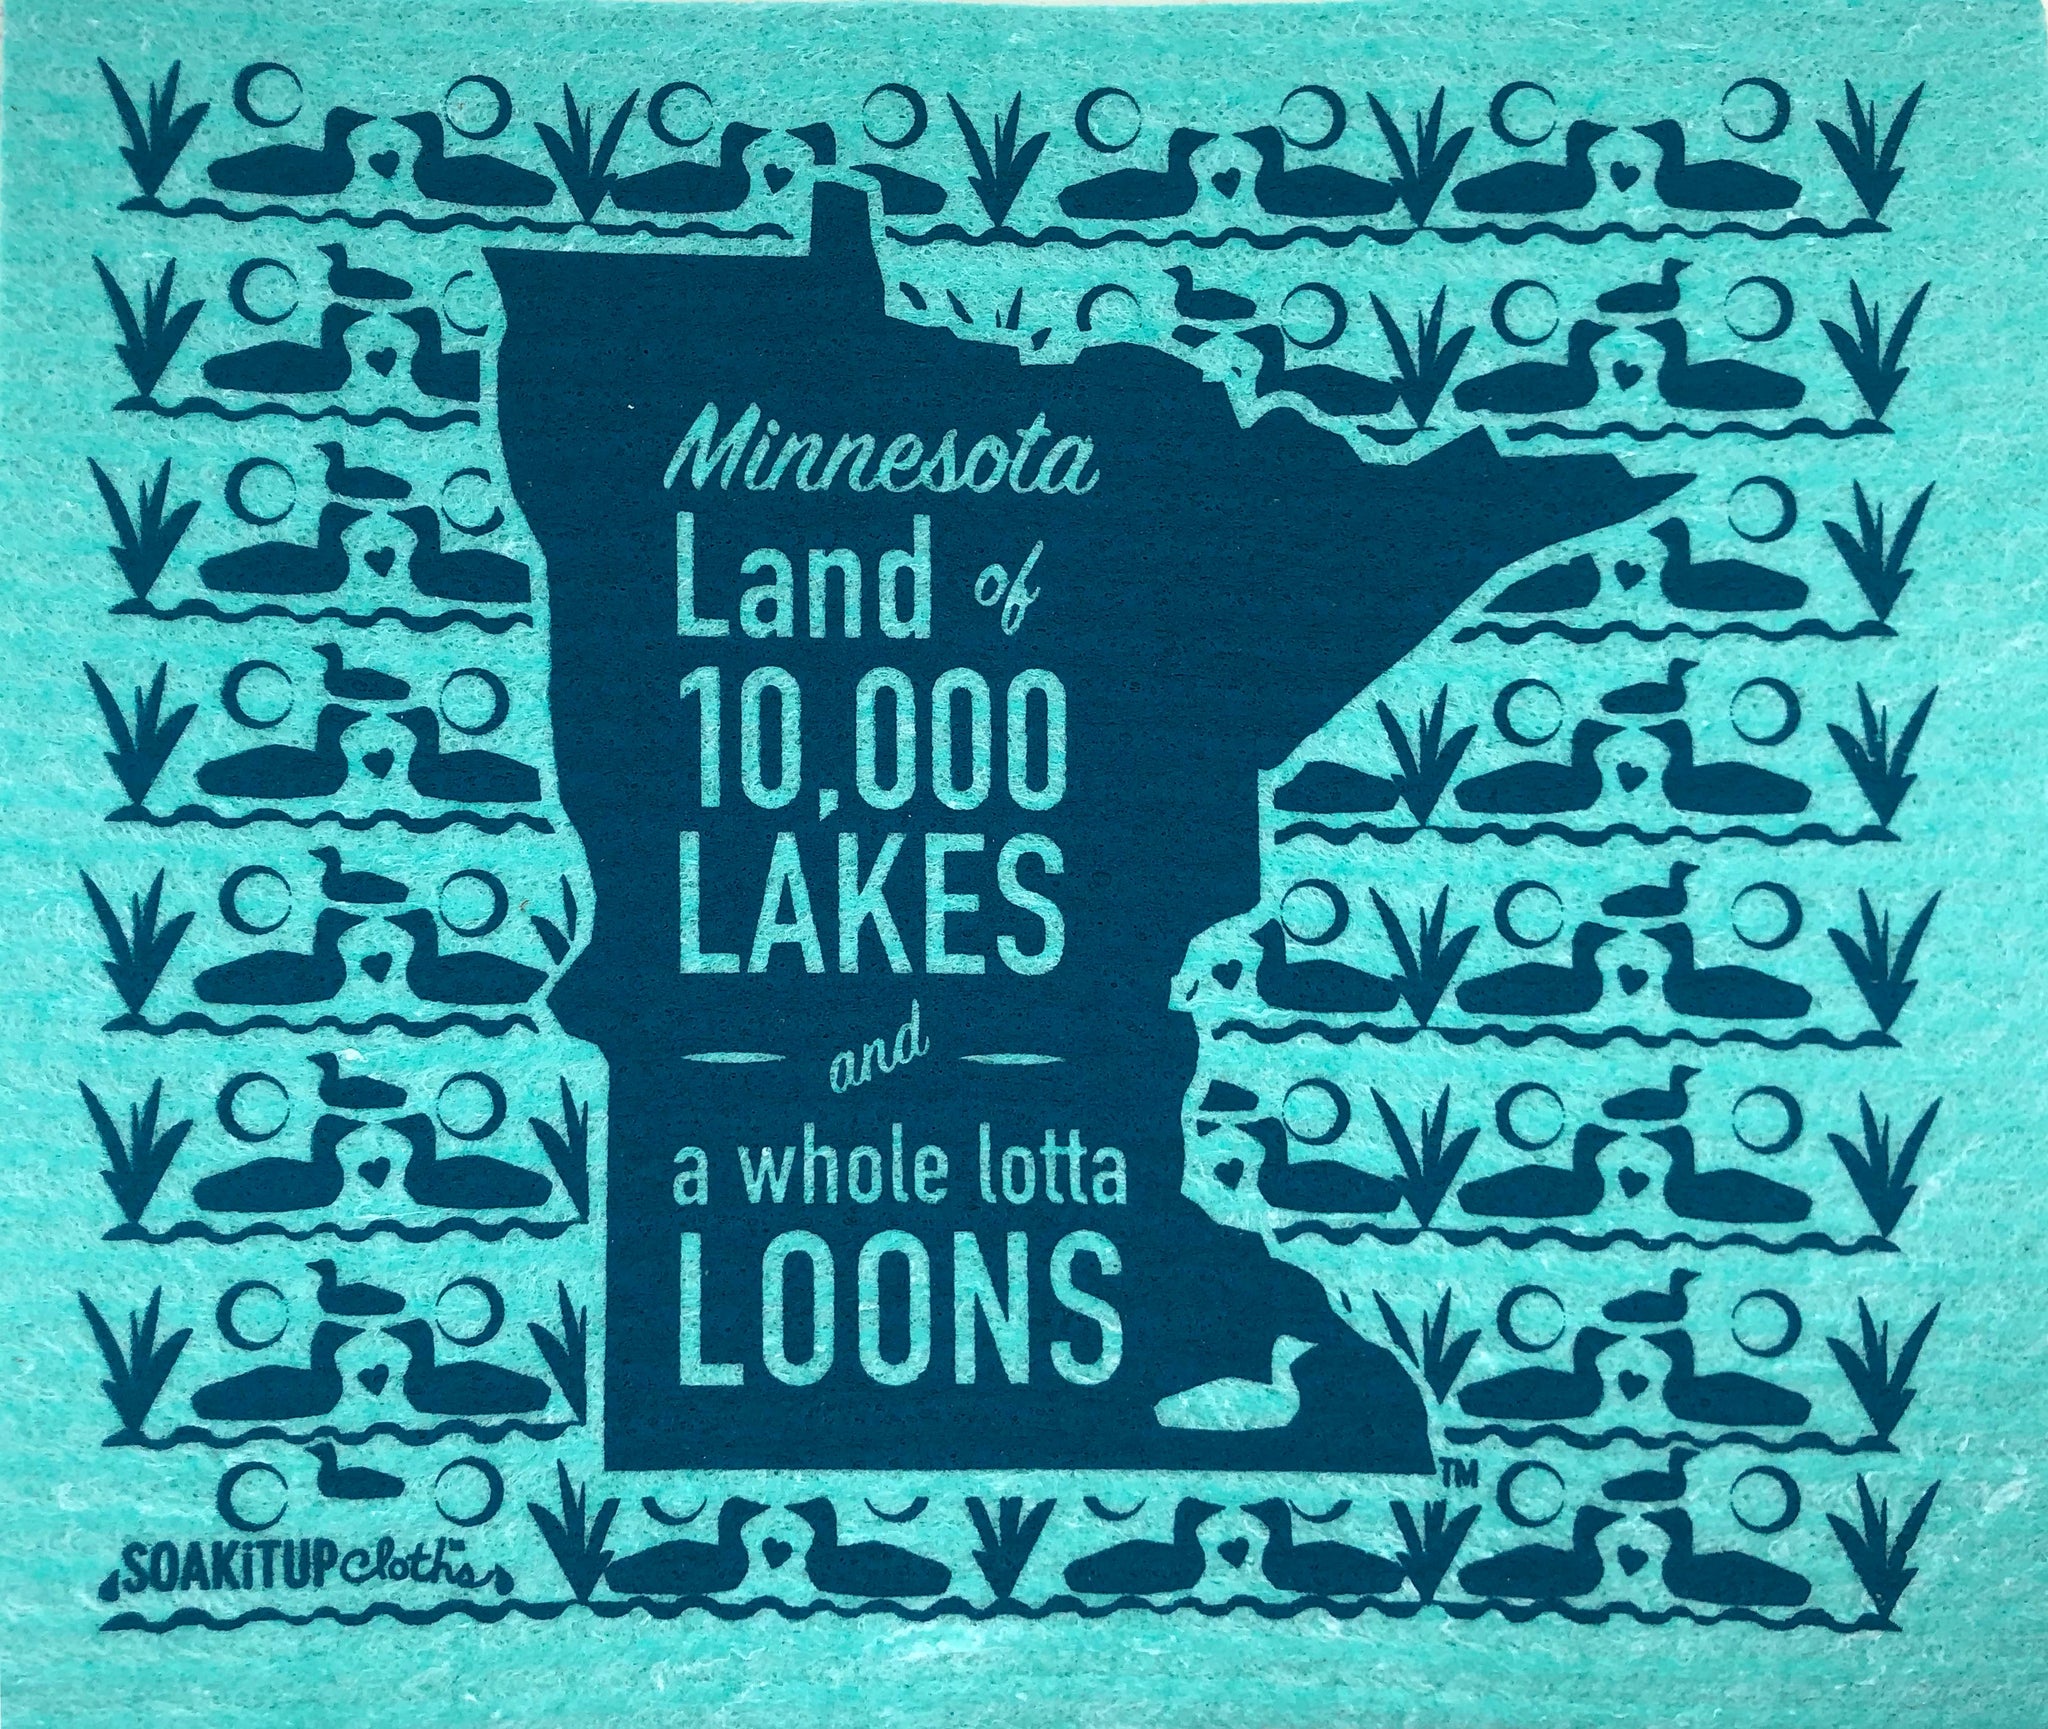 Minnesota Land of 10,000 Lakes and a Whole Lotta Loons -